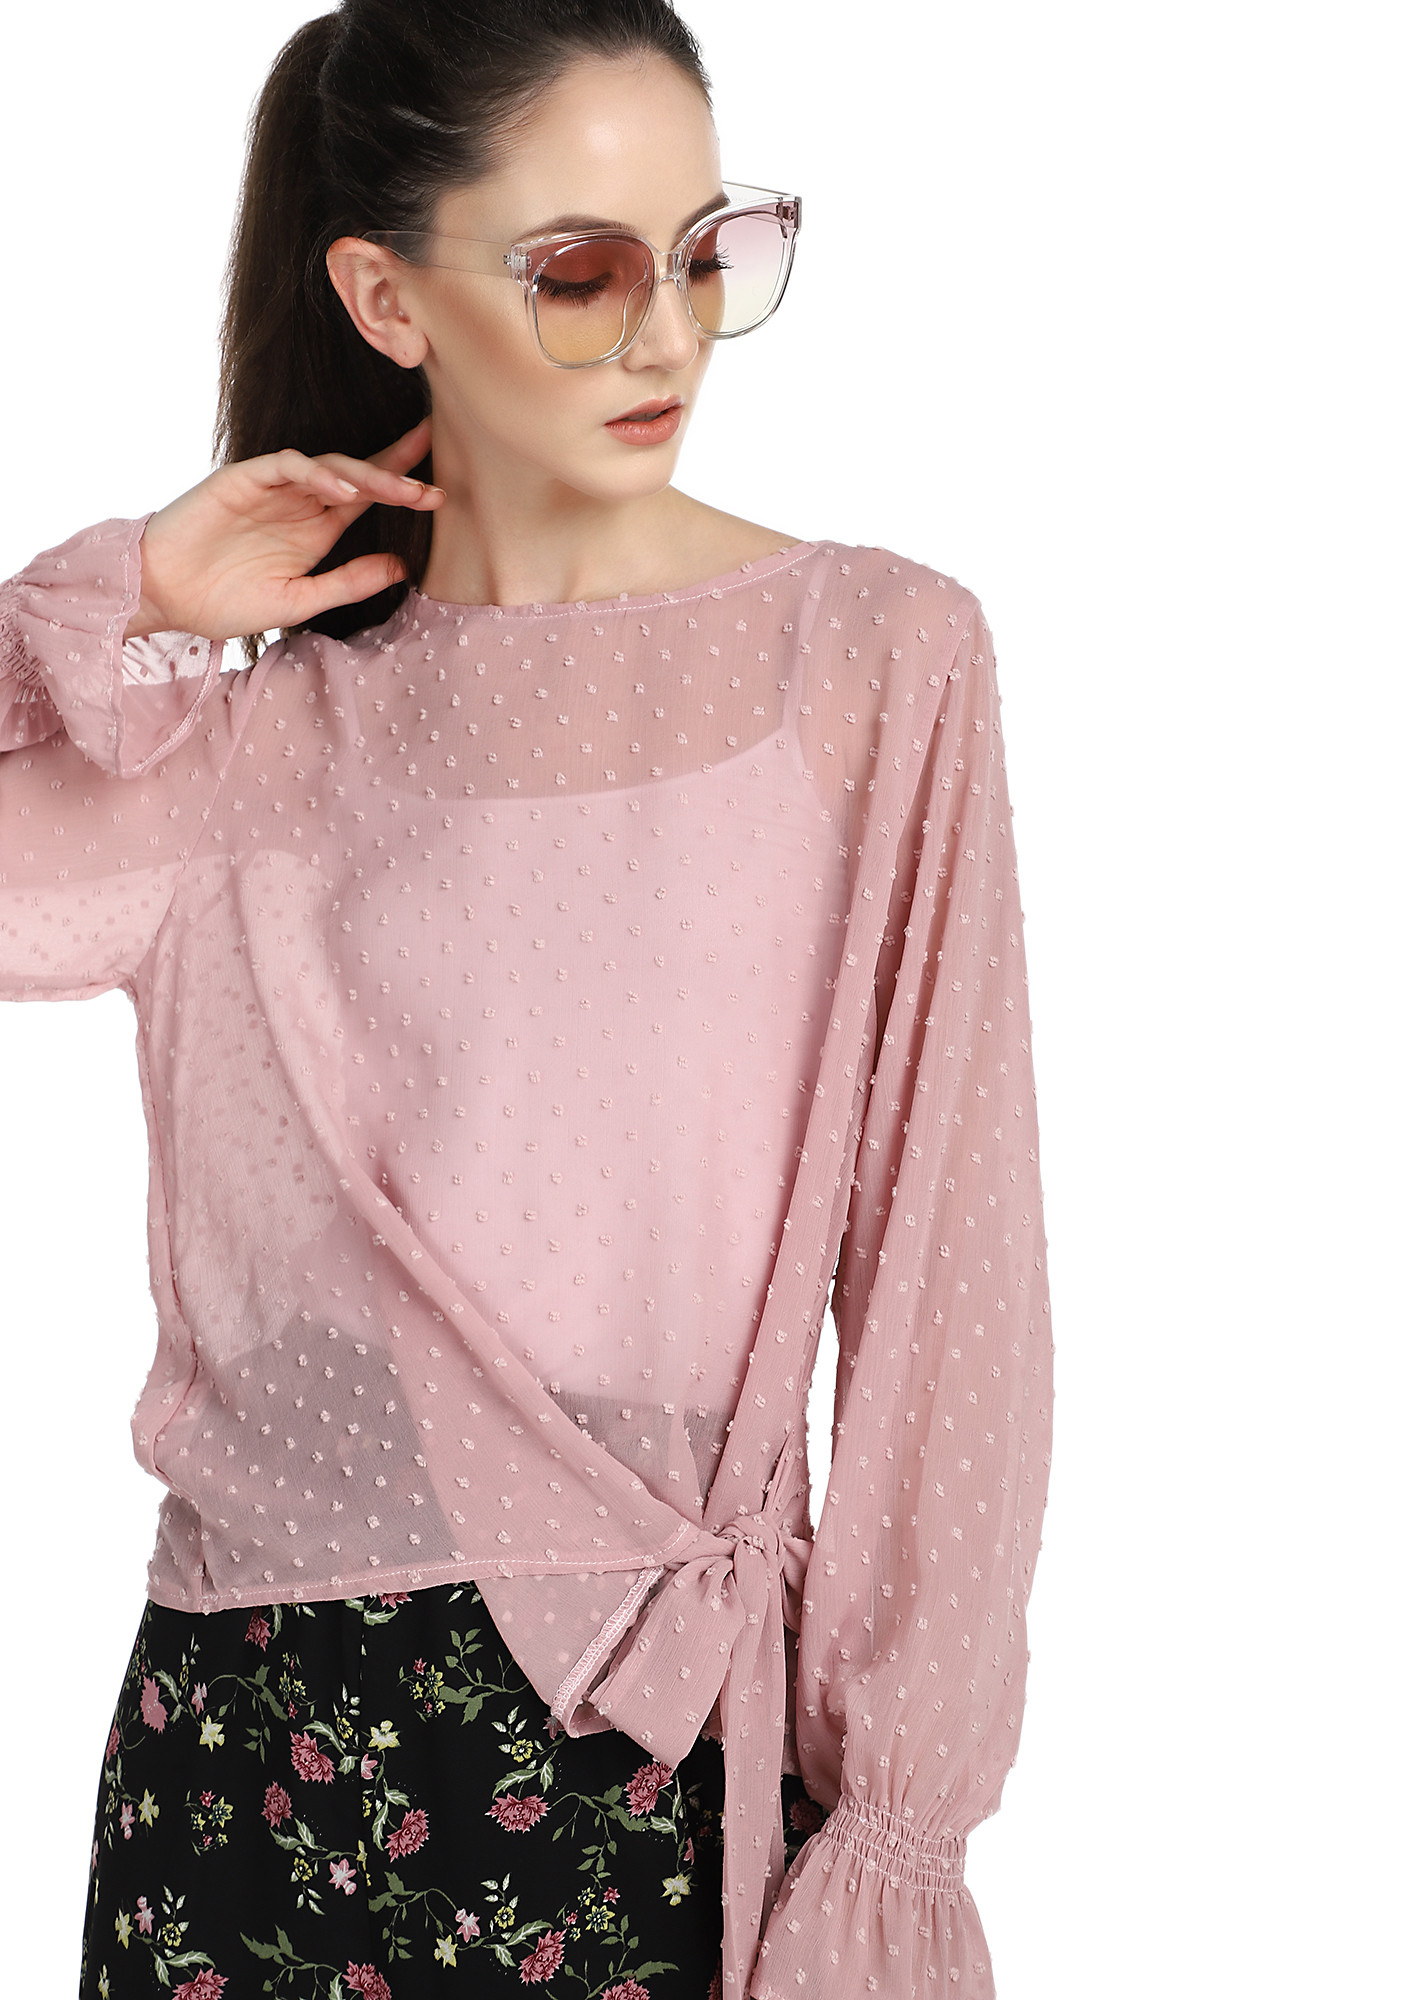 FOUND THE DOBBY DOTS PASTEL MAUVE TOP